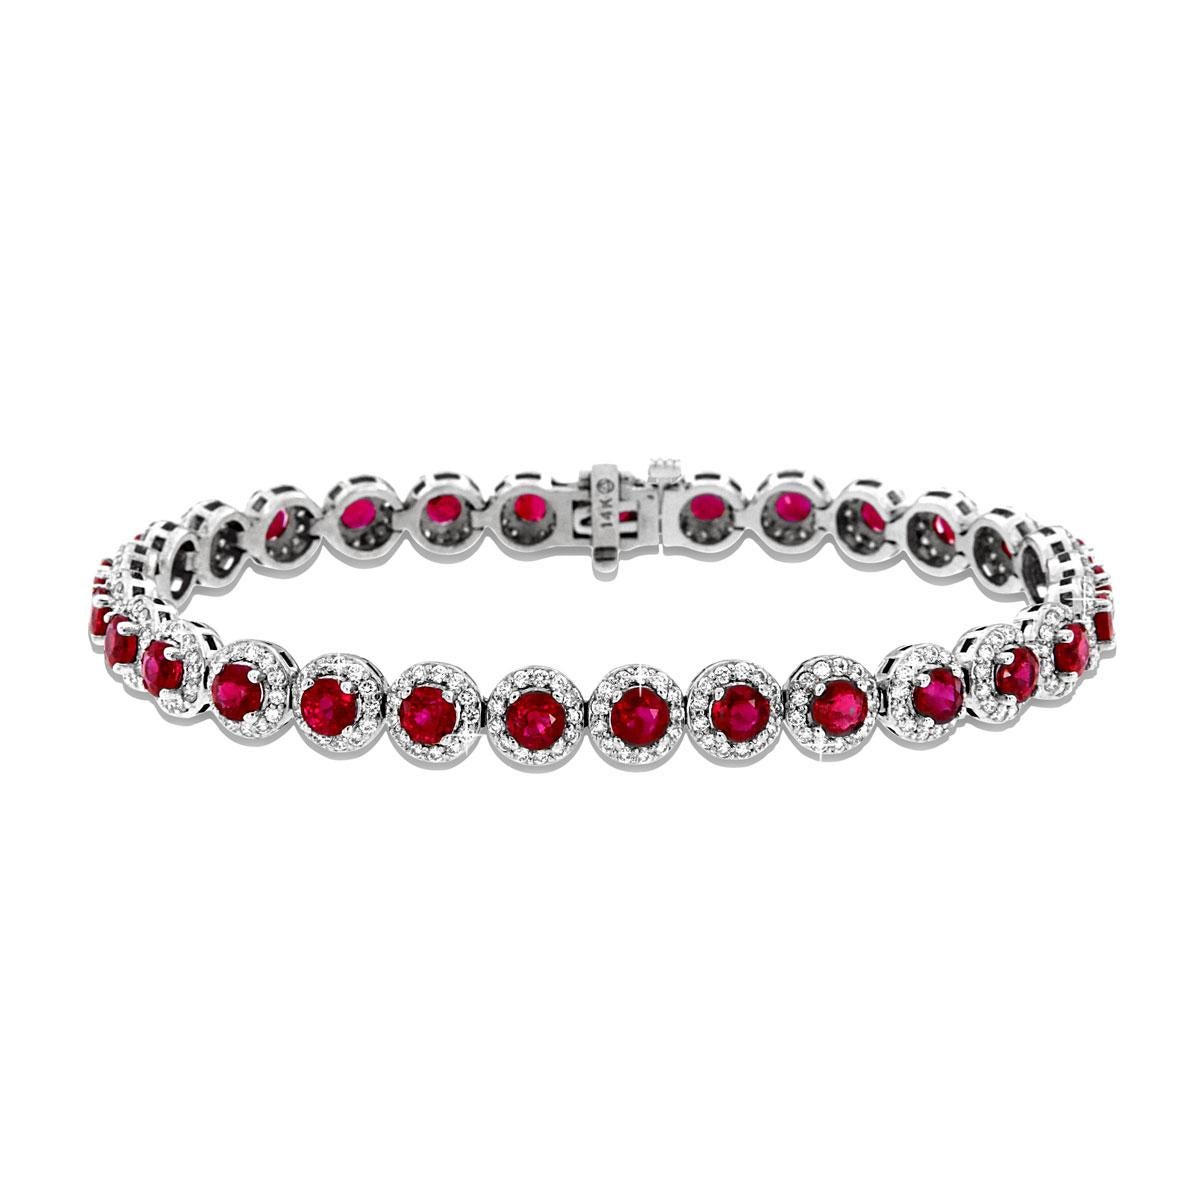 This Hand Crafted Bracelet showcase 29 perfectly matched pigeon red color Burmese rubies in a total of 10.13 carat. The rubies are diamond cut with an extraordinary luster! surrounded by 377 full cut round diamonds in a total weight of 3.05-carat